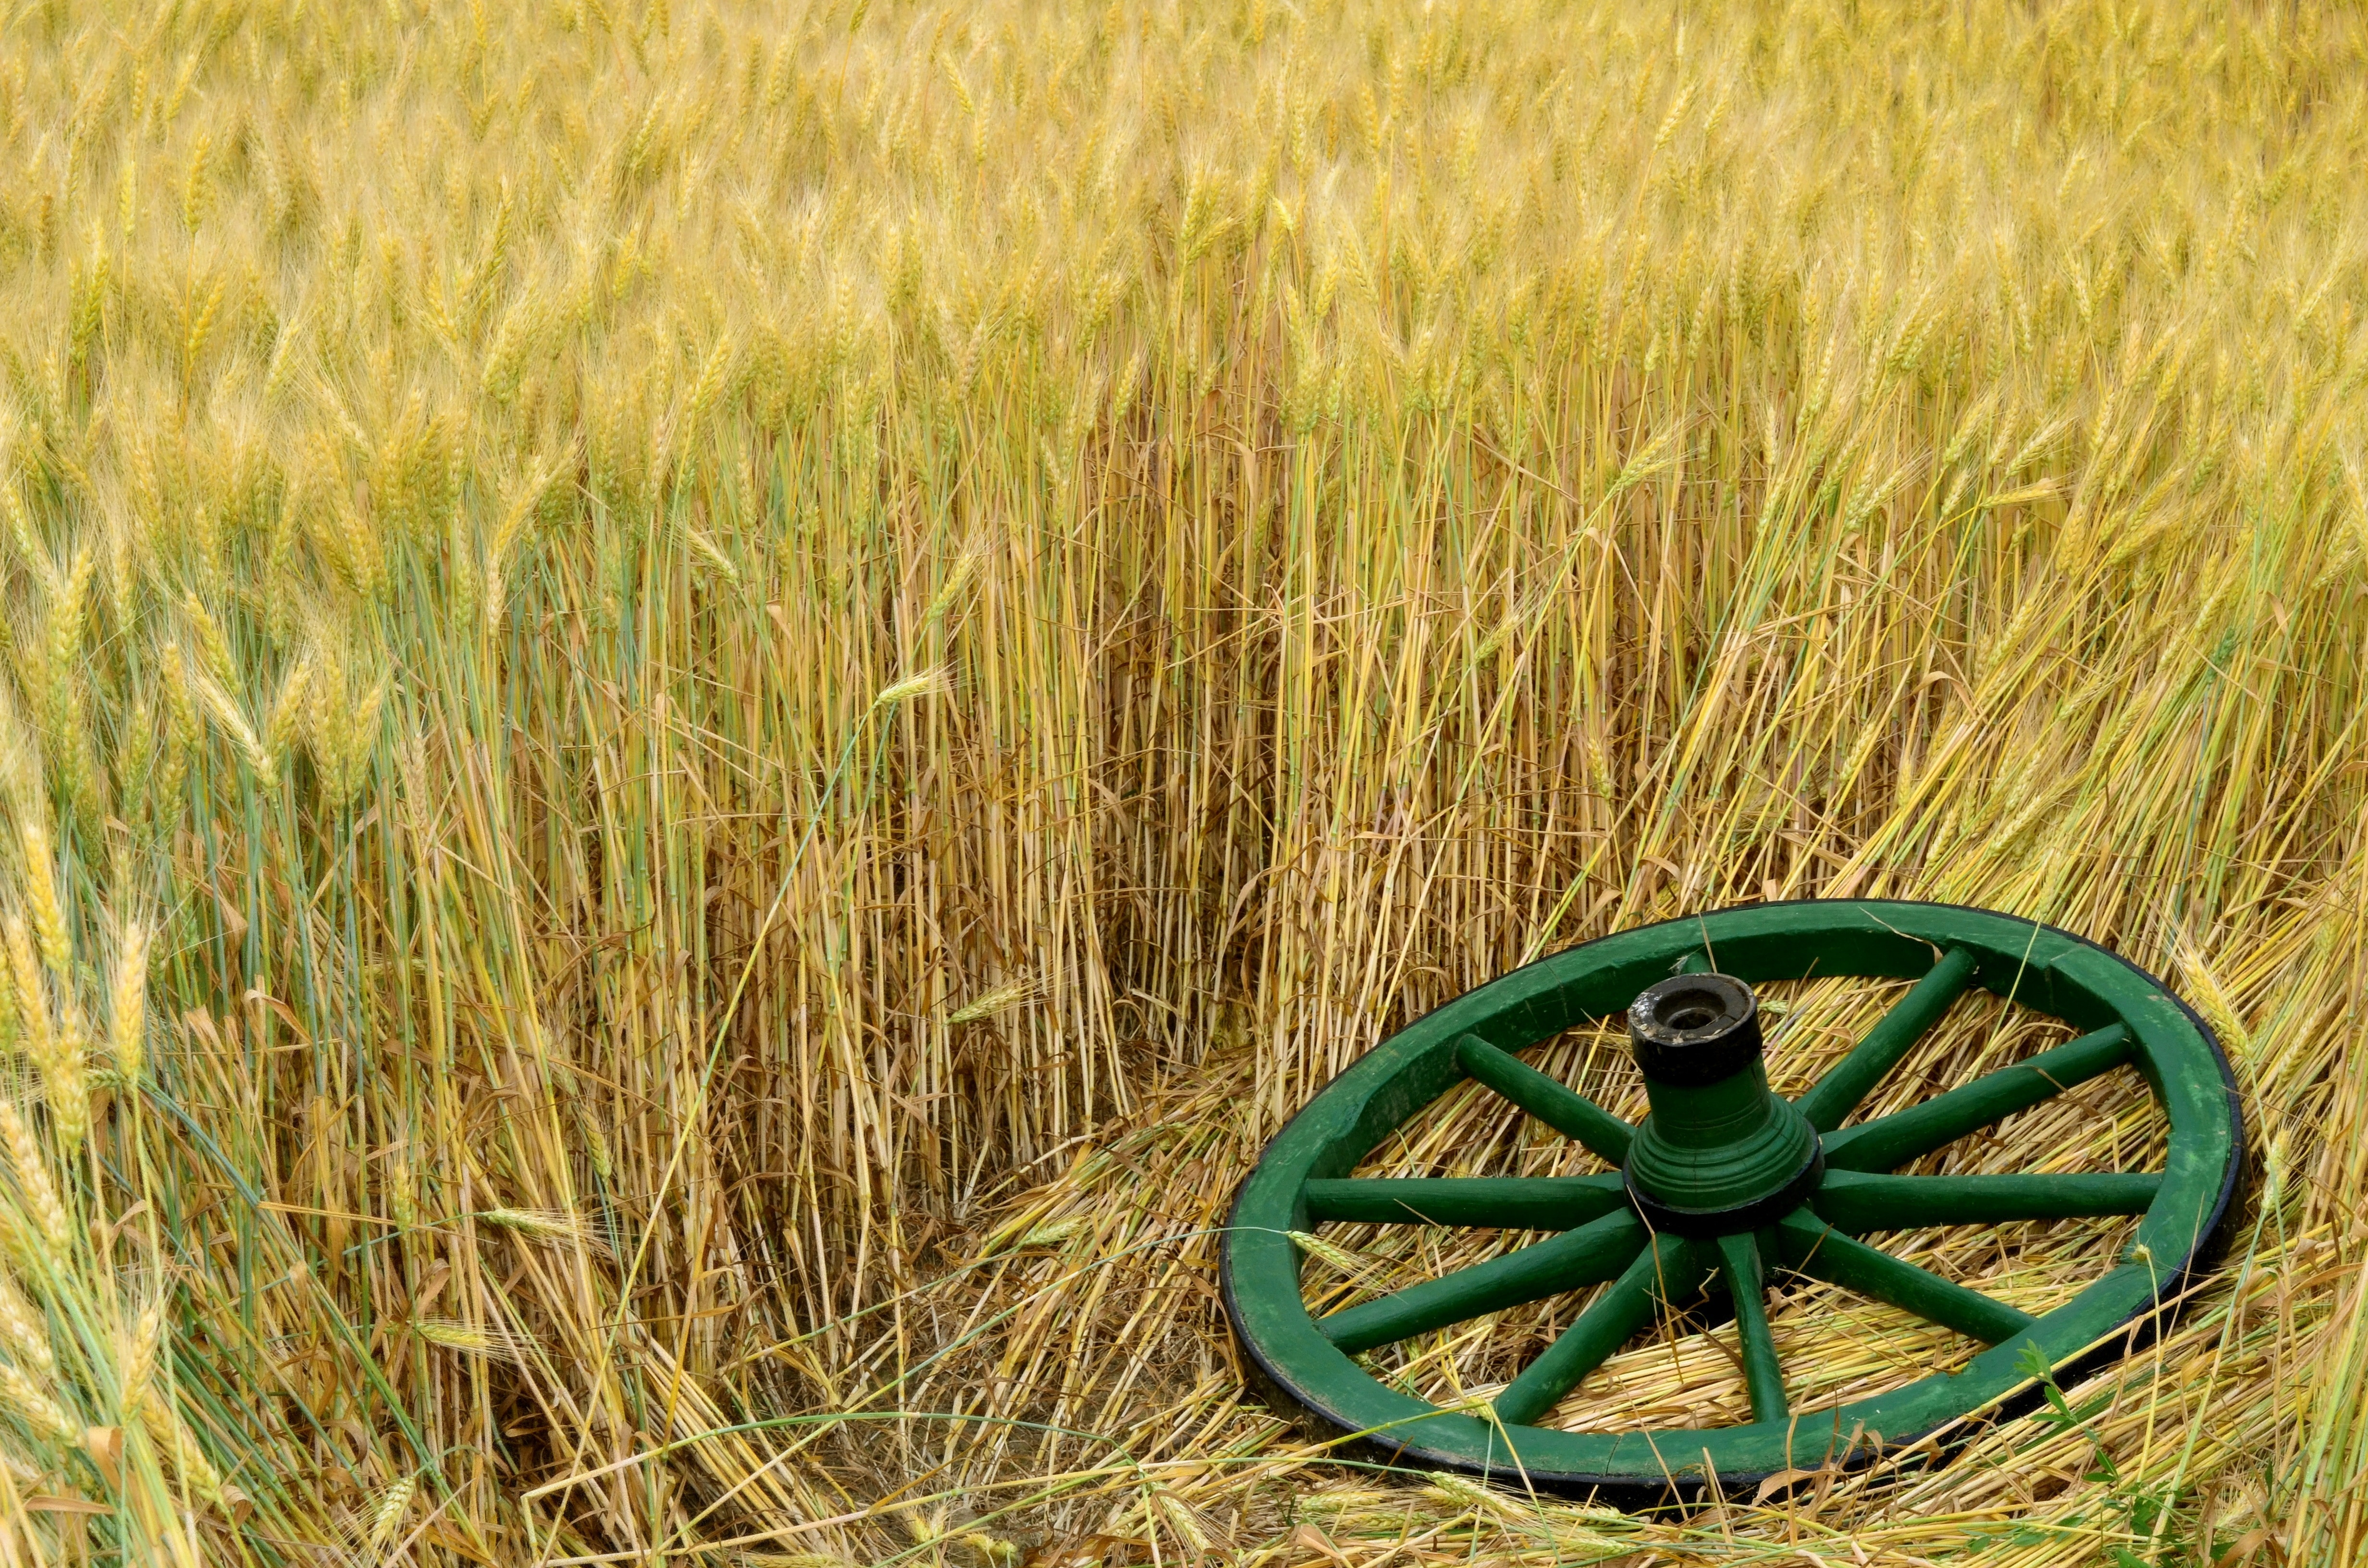 green carriage wheel on wheat field during daytime